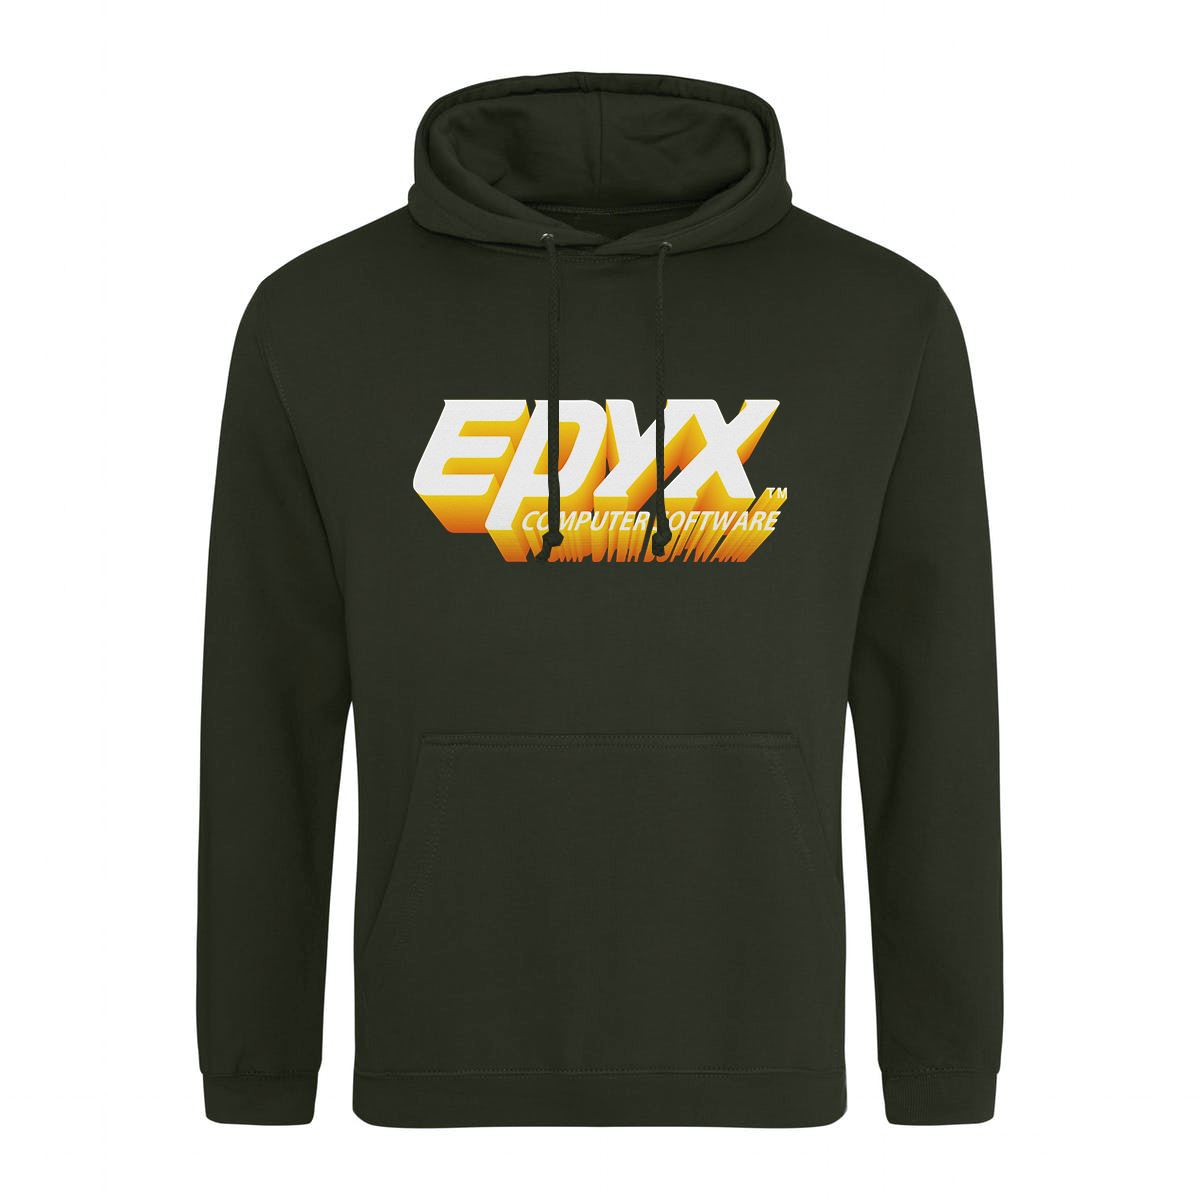 Epyx Computer Software Retro Gaming Hoodie Hoodie Seven Squared Small 36" Chest Combat Green 